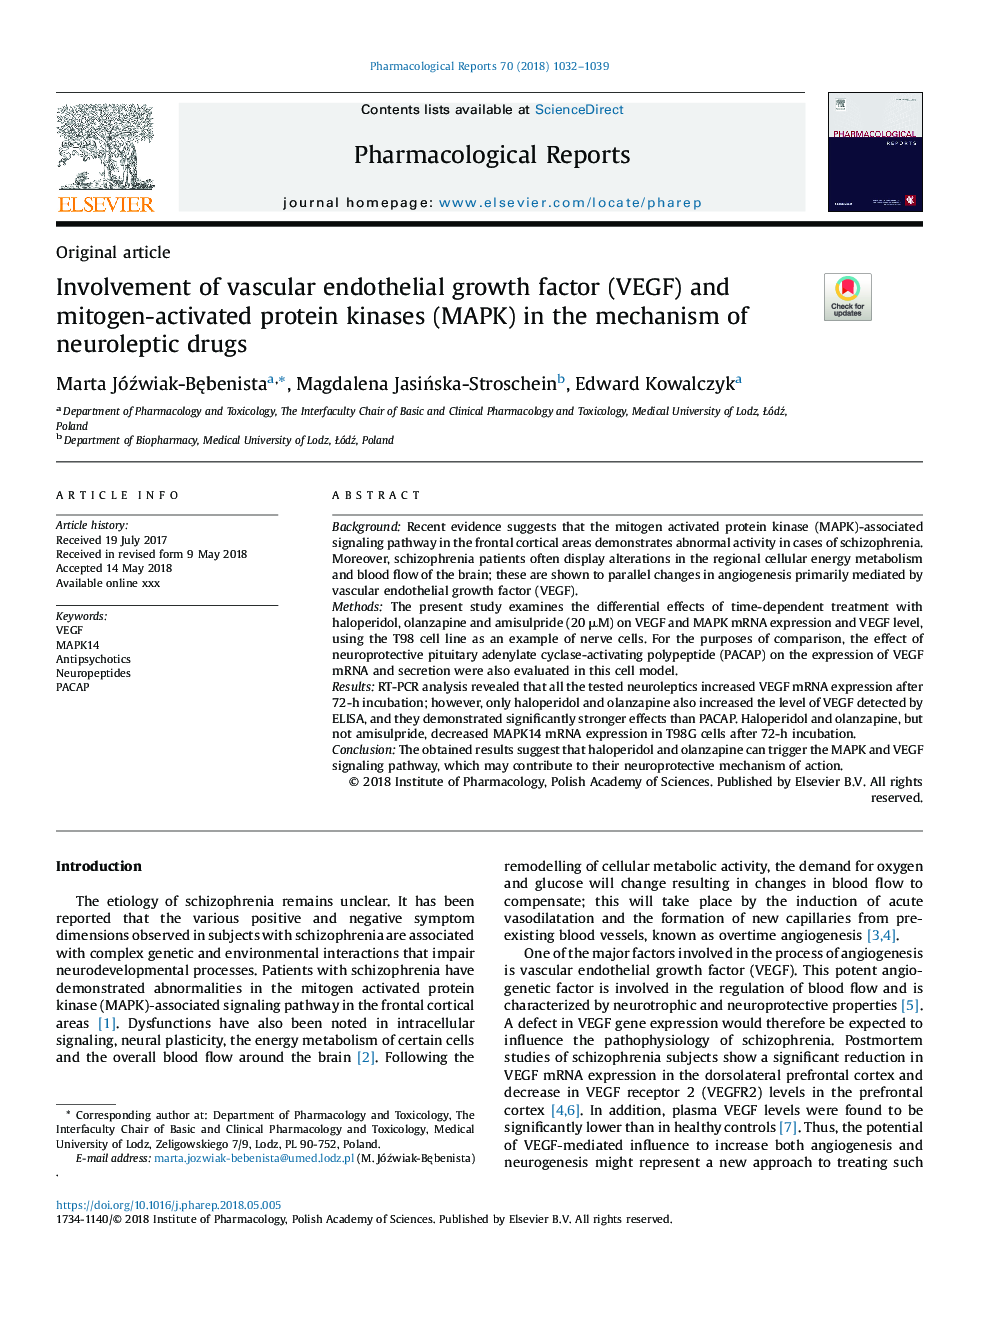 Involvement of vascular endothelial growth factor (VEGF) and mitogen-activated protein kinases (MAPK) in the mechanism of neuroleptic drugs